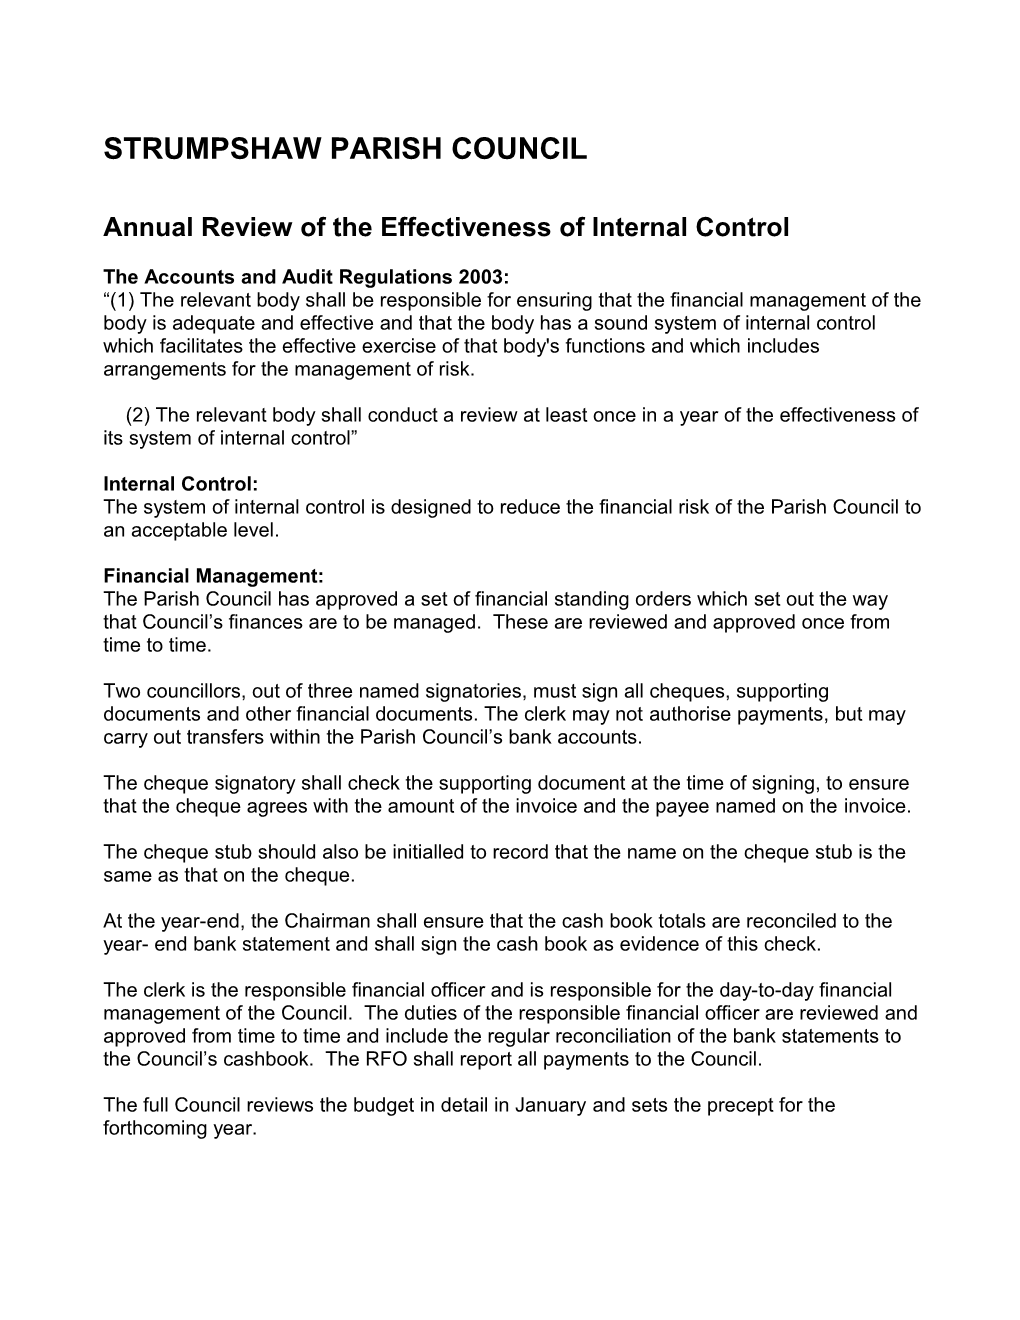 Annual Review of the Effectiveness of Internal Control